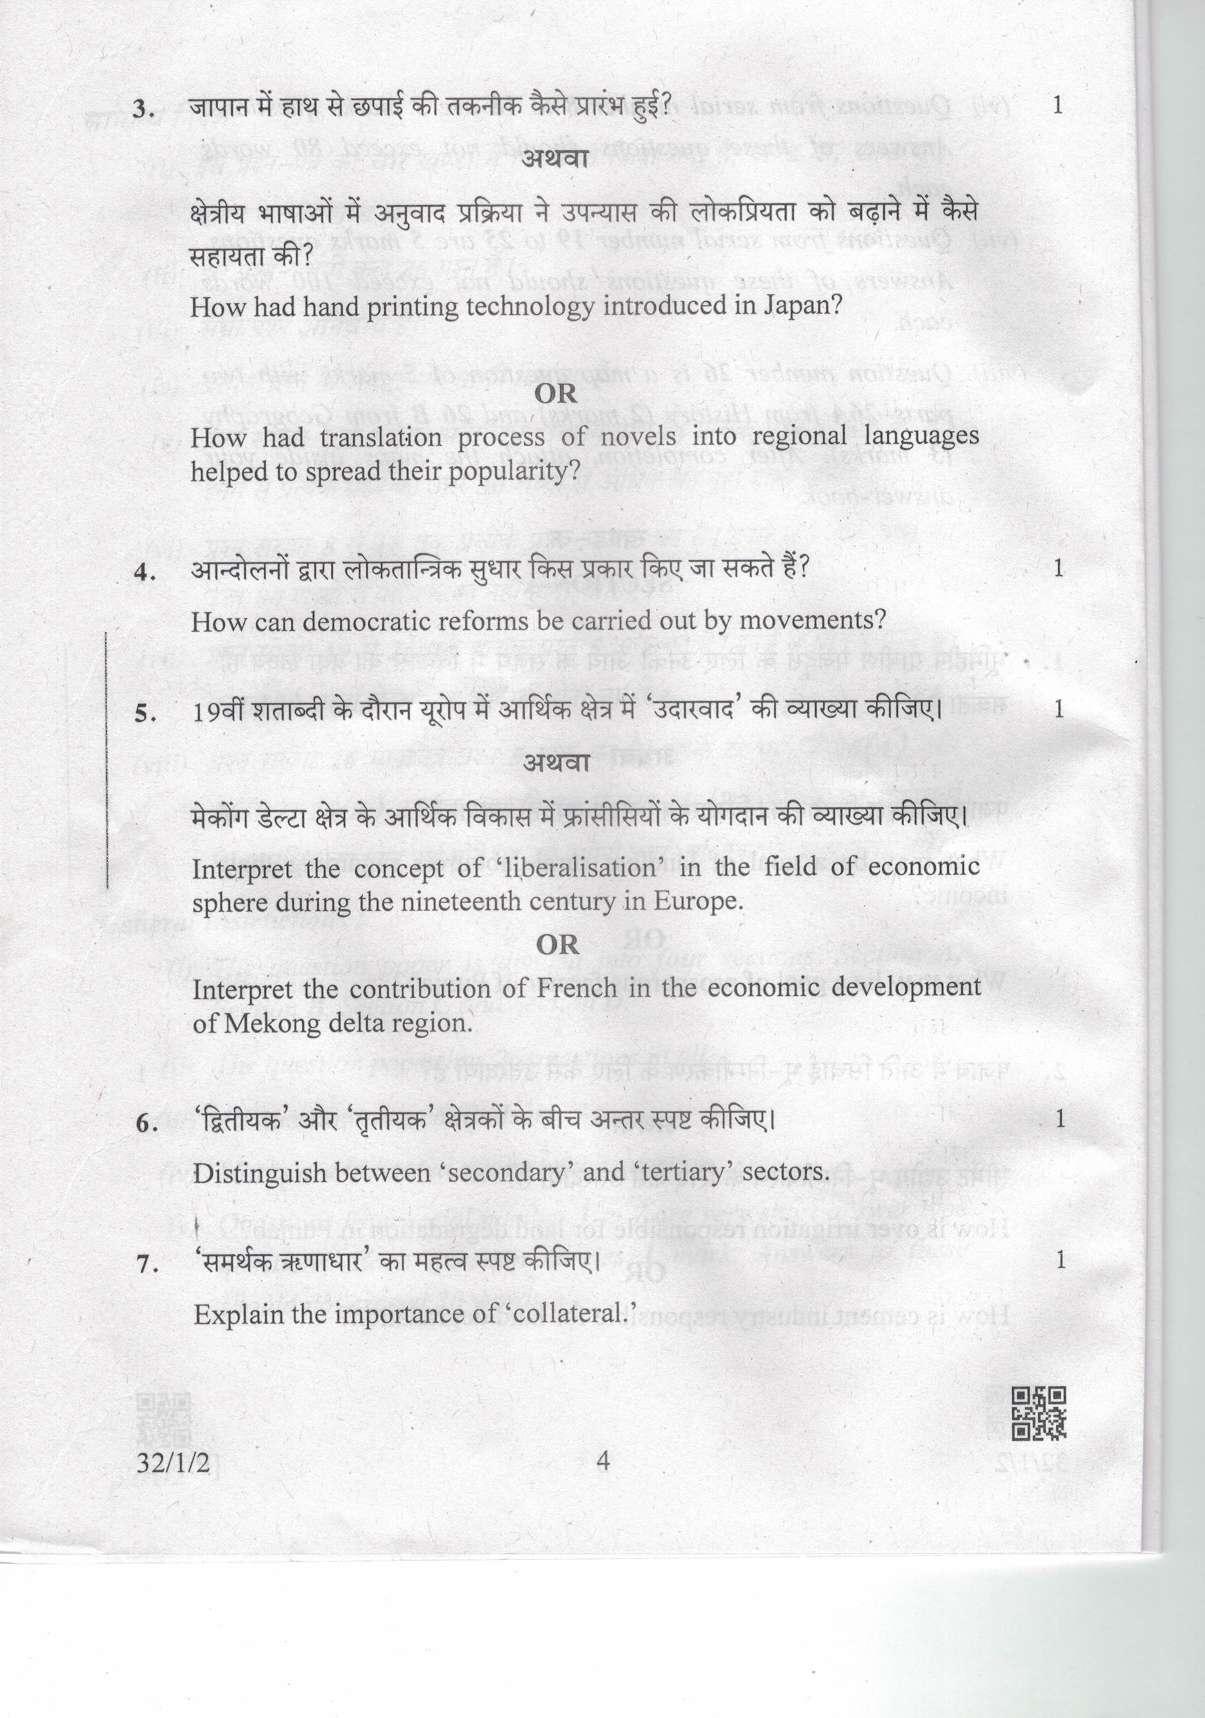 CBSE Class 10 32-1-2 Social Science 2019 Question Paper - Page 4